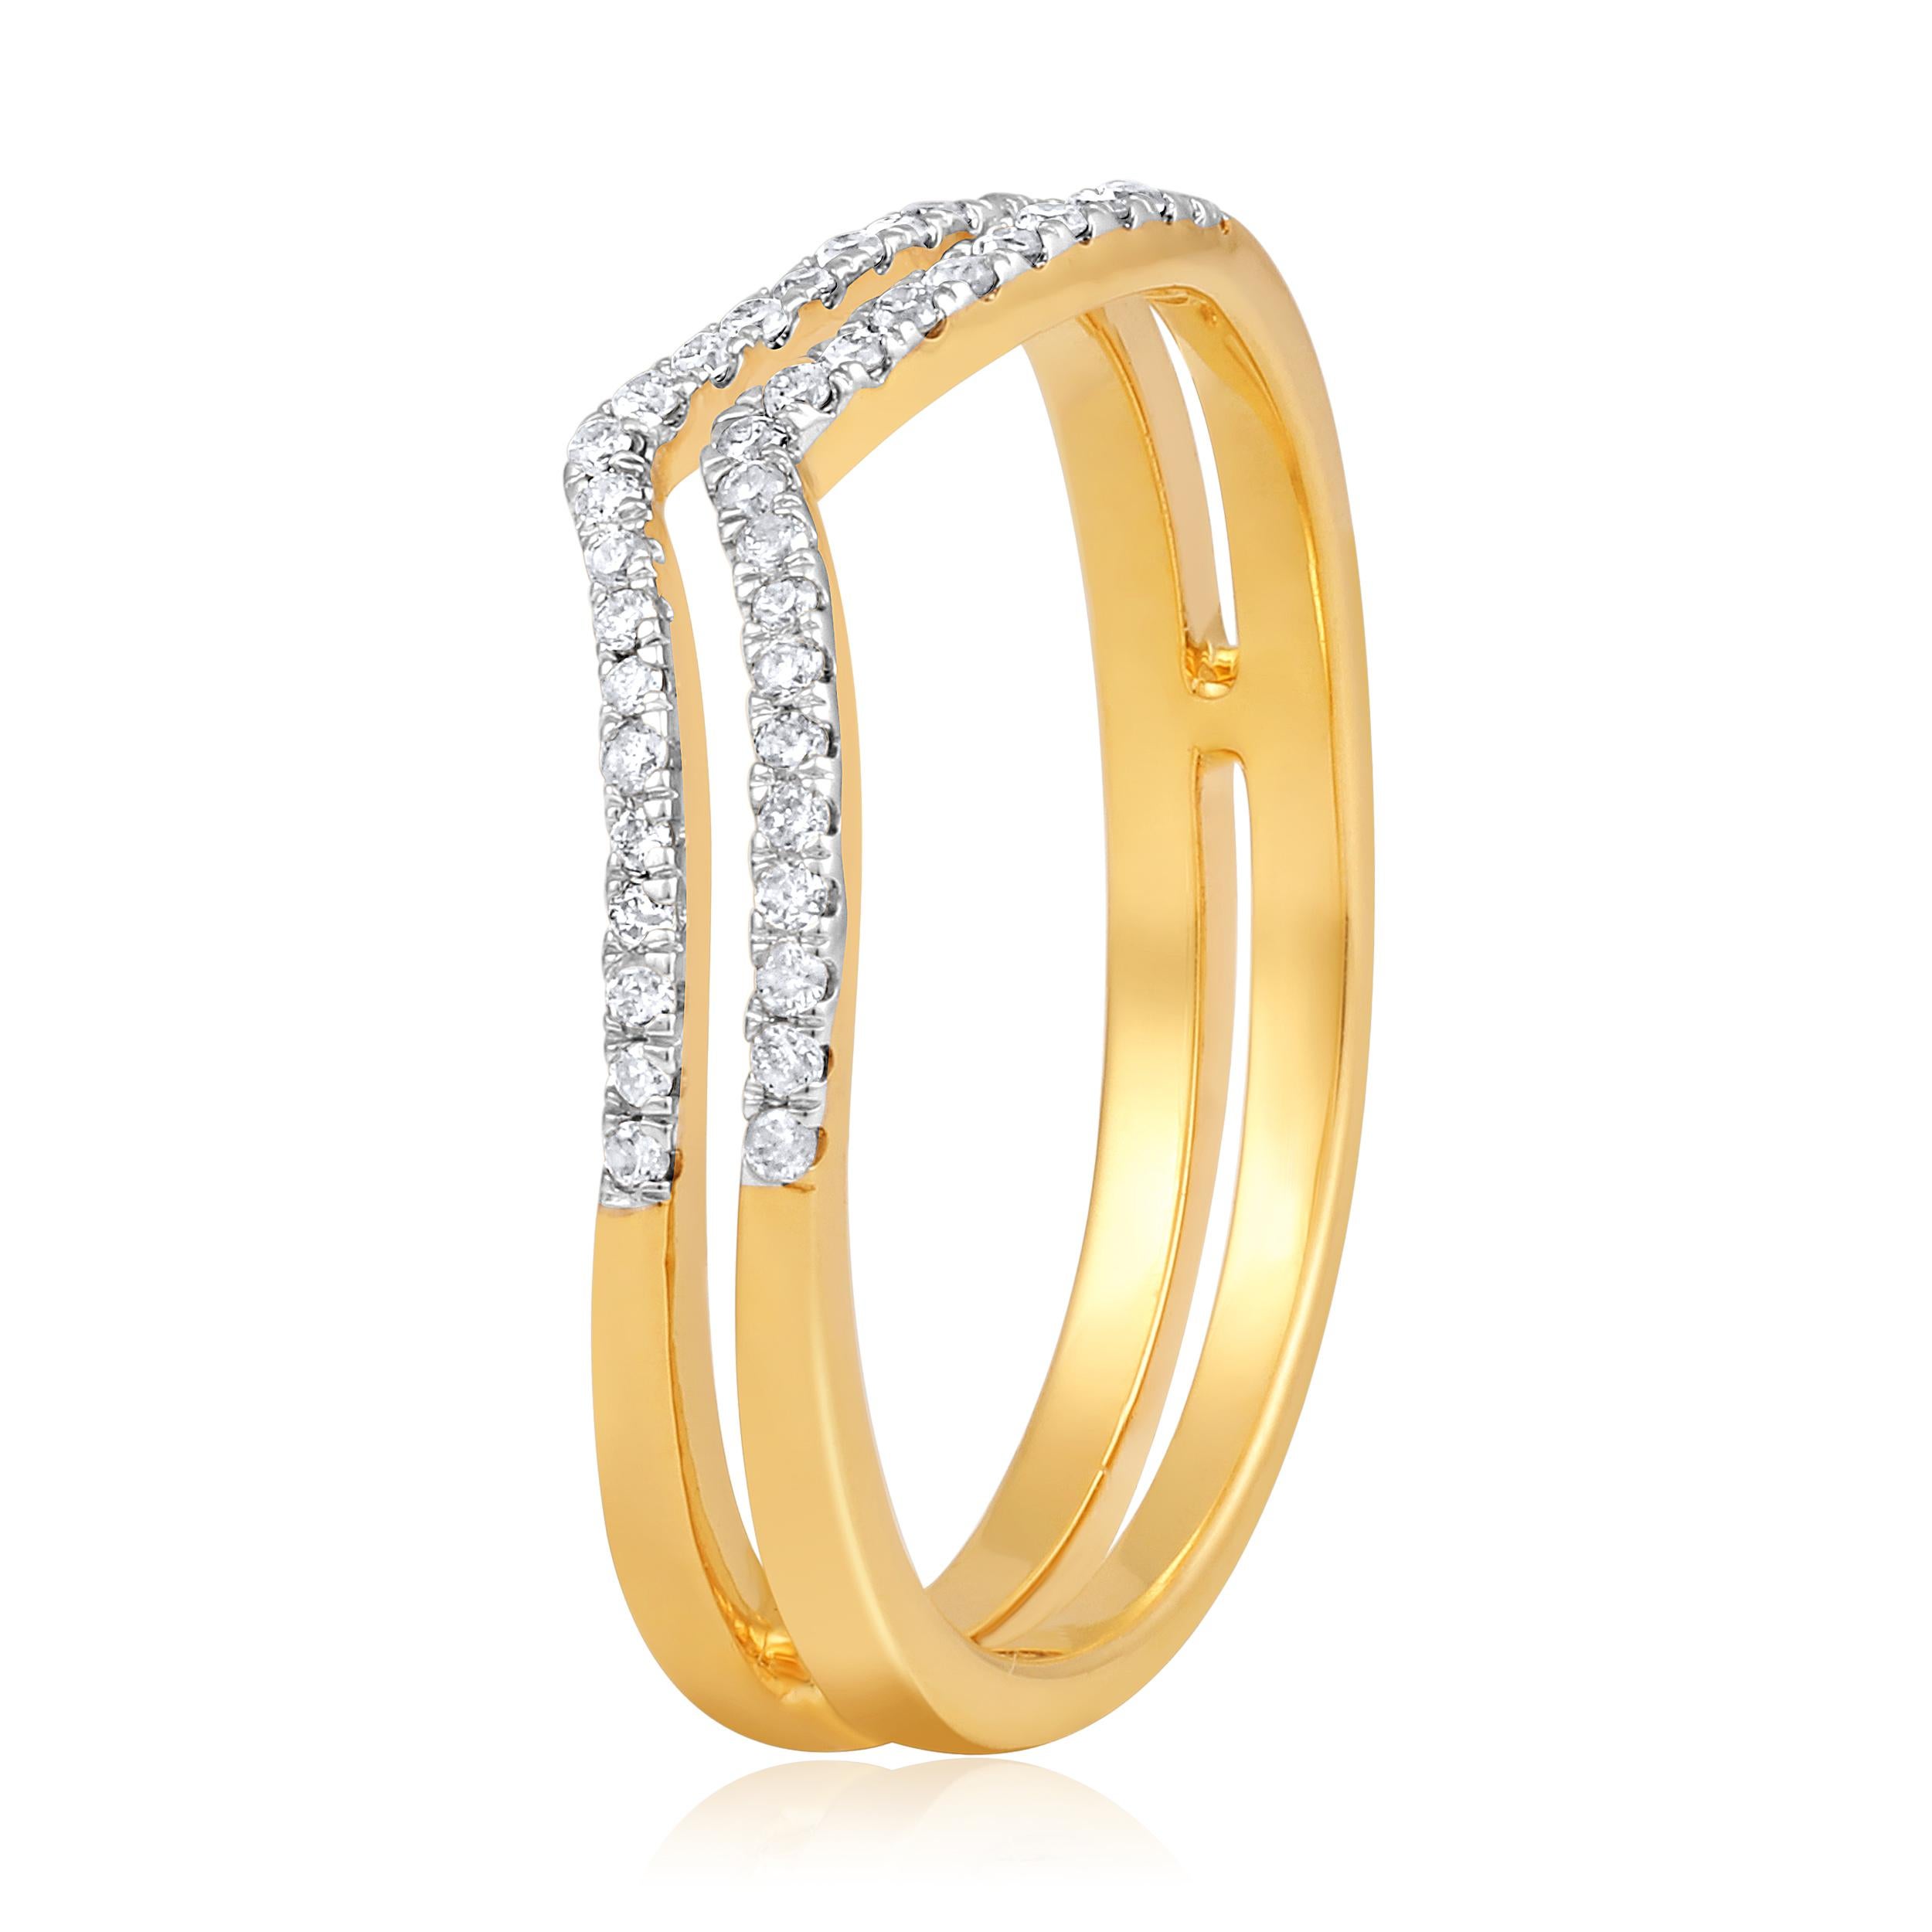 Ring Size: US 7 

Crafted in 2.06 grams of 10K Yellow Gold, the ring contains 41 stones of Round Diamonds with a total of 0.15 carat in F-G color and I1-I2 clarity.

CONTEMPORARY AND TIMELESS ESSENCE: Crafted in 14-karat/18-karat with 100% natural